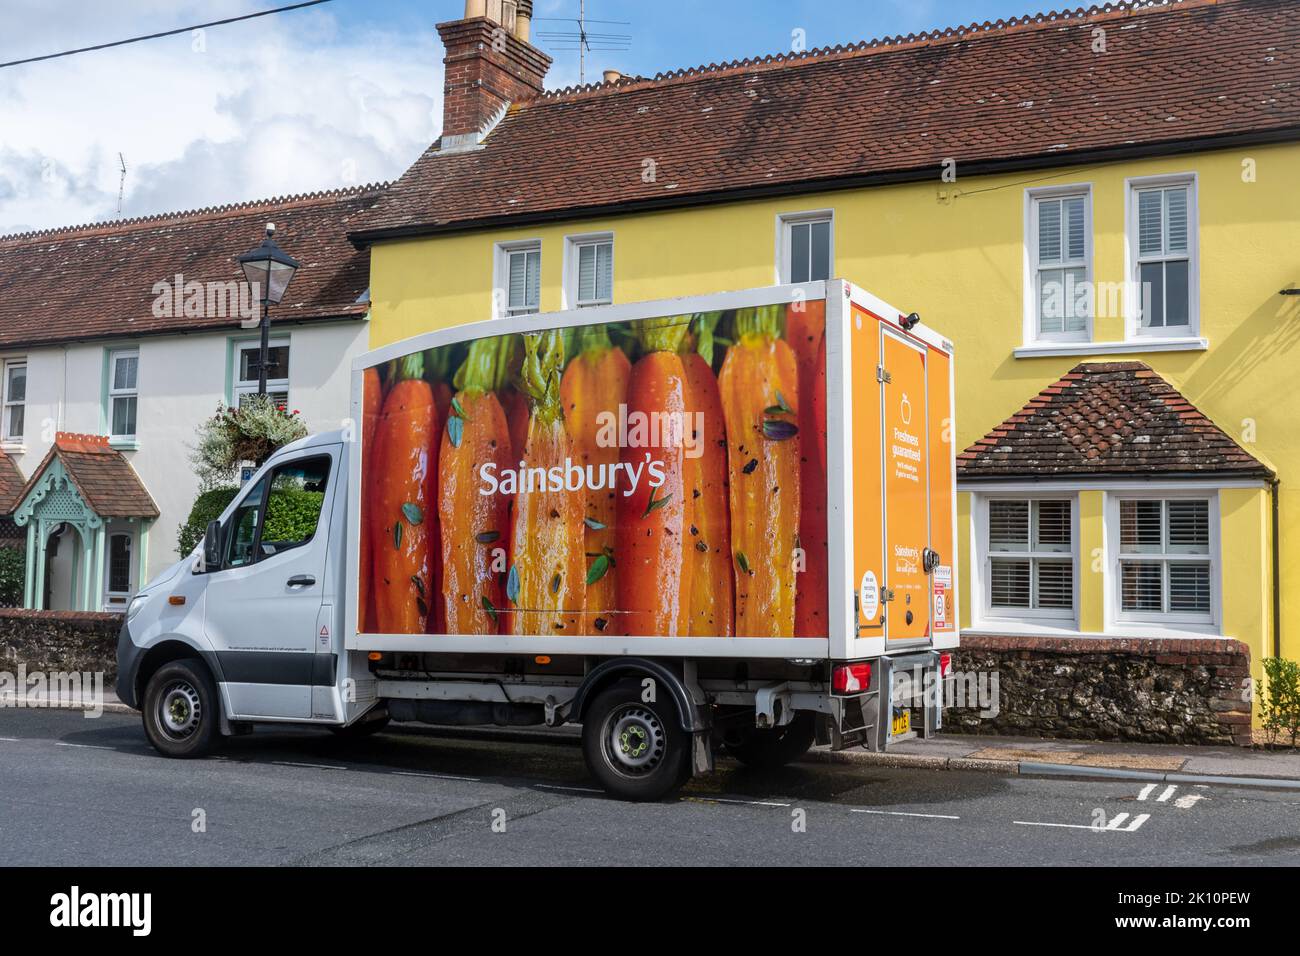 Sainsburys supermarket delivery van outside a yellow house, England, UK, home delivery vehicle Stock Photo